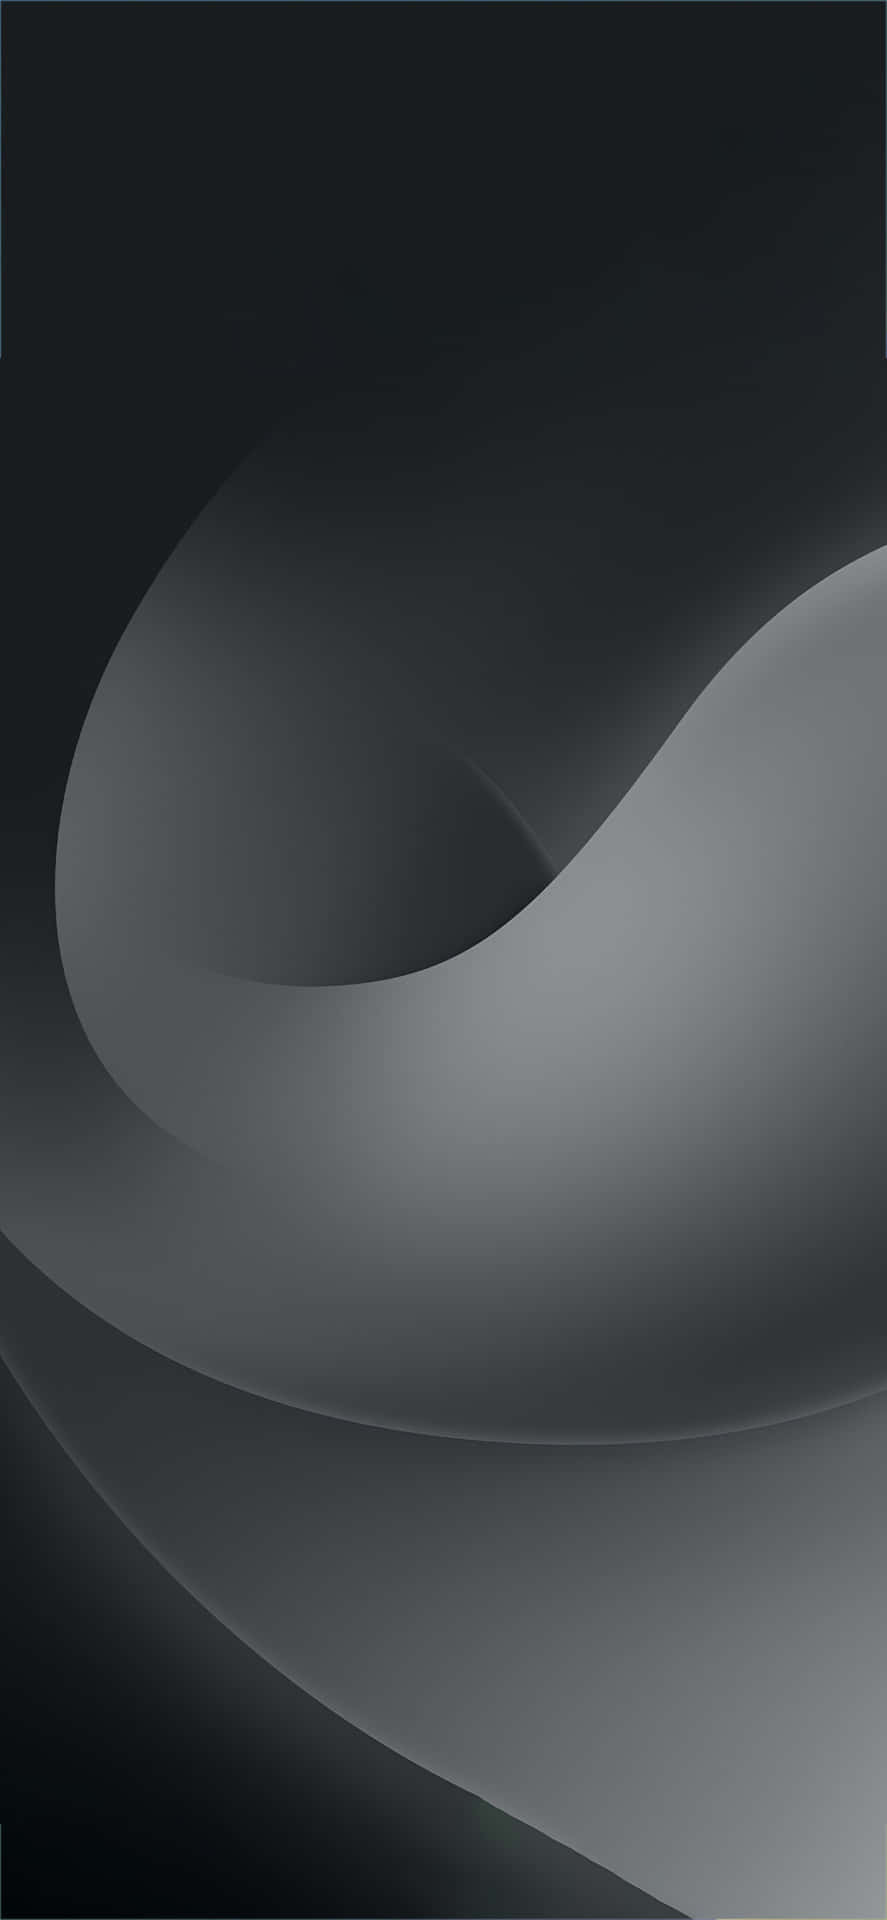 Abstract_ Black_and_ White_ Curves Wallpaper